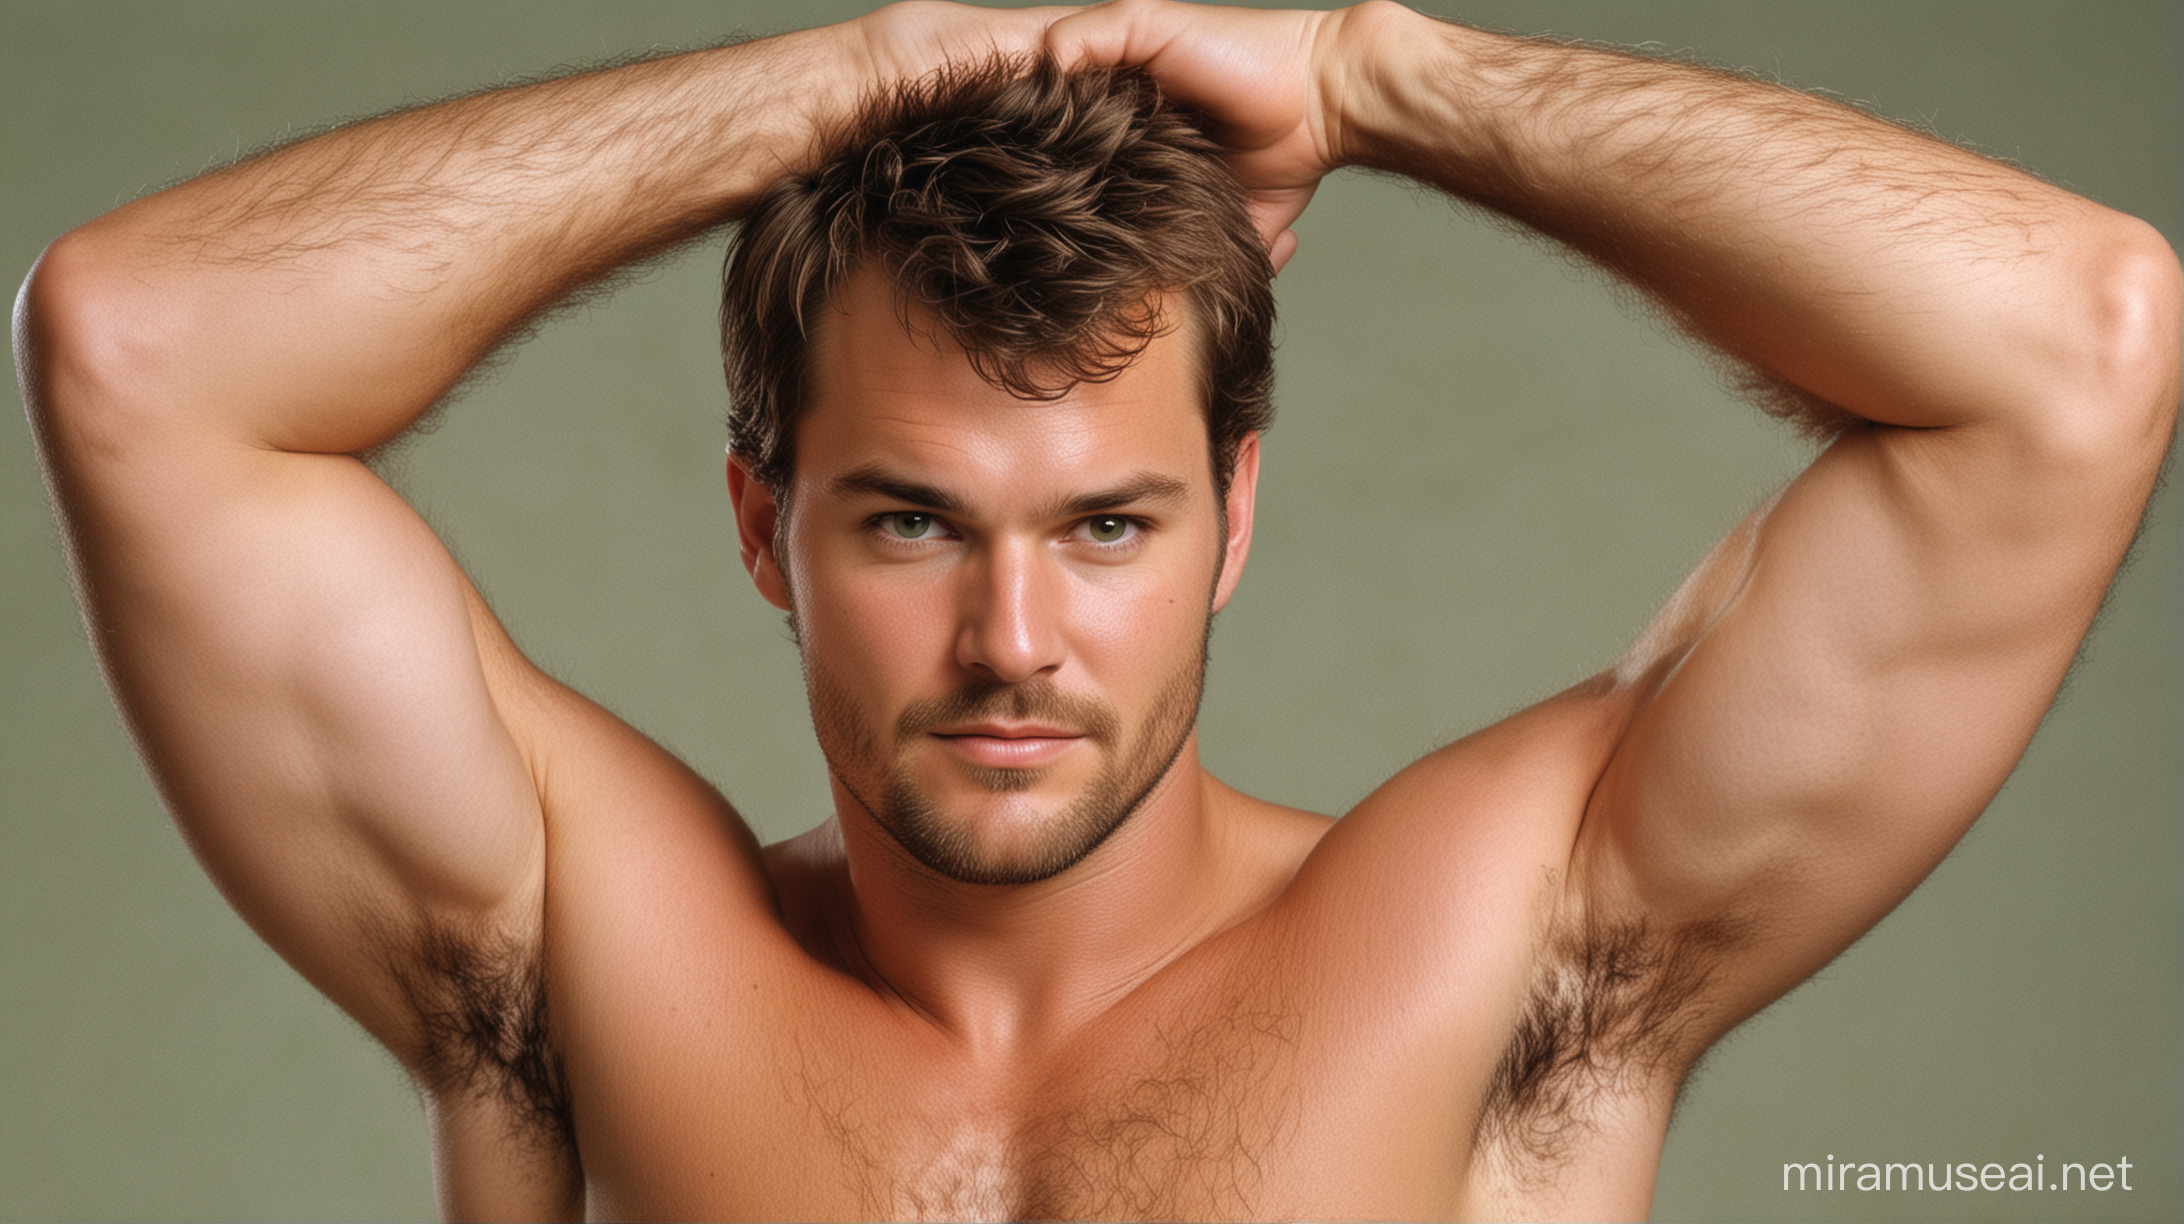 Chris ODonnell 25YearOld Actor Flexing Muscles with Hairy Chest and Arms